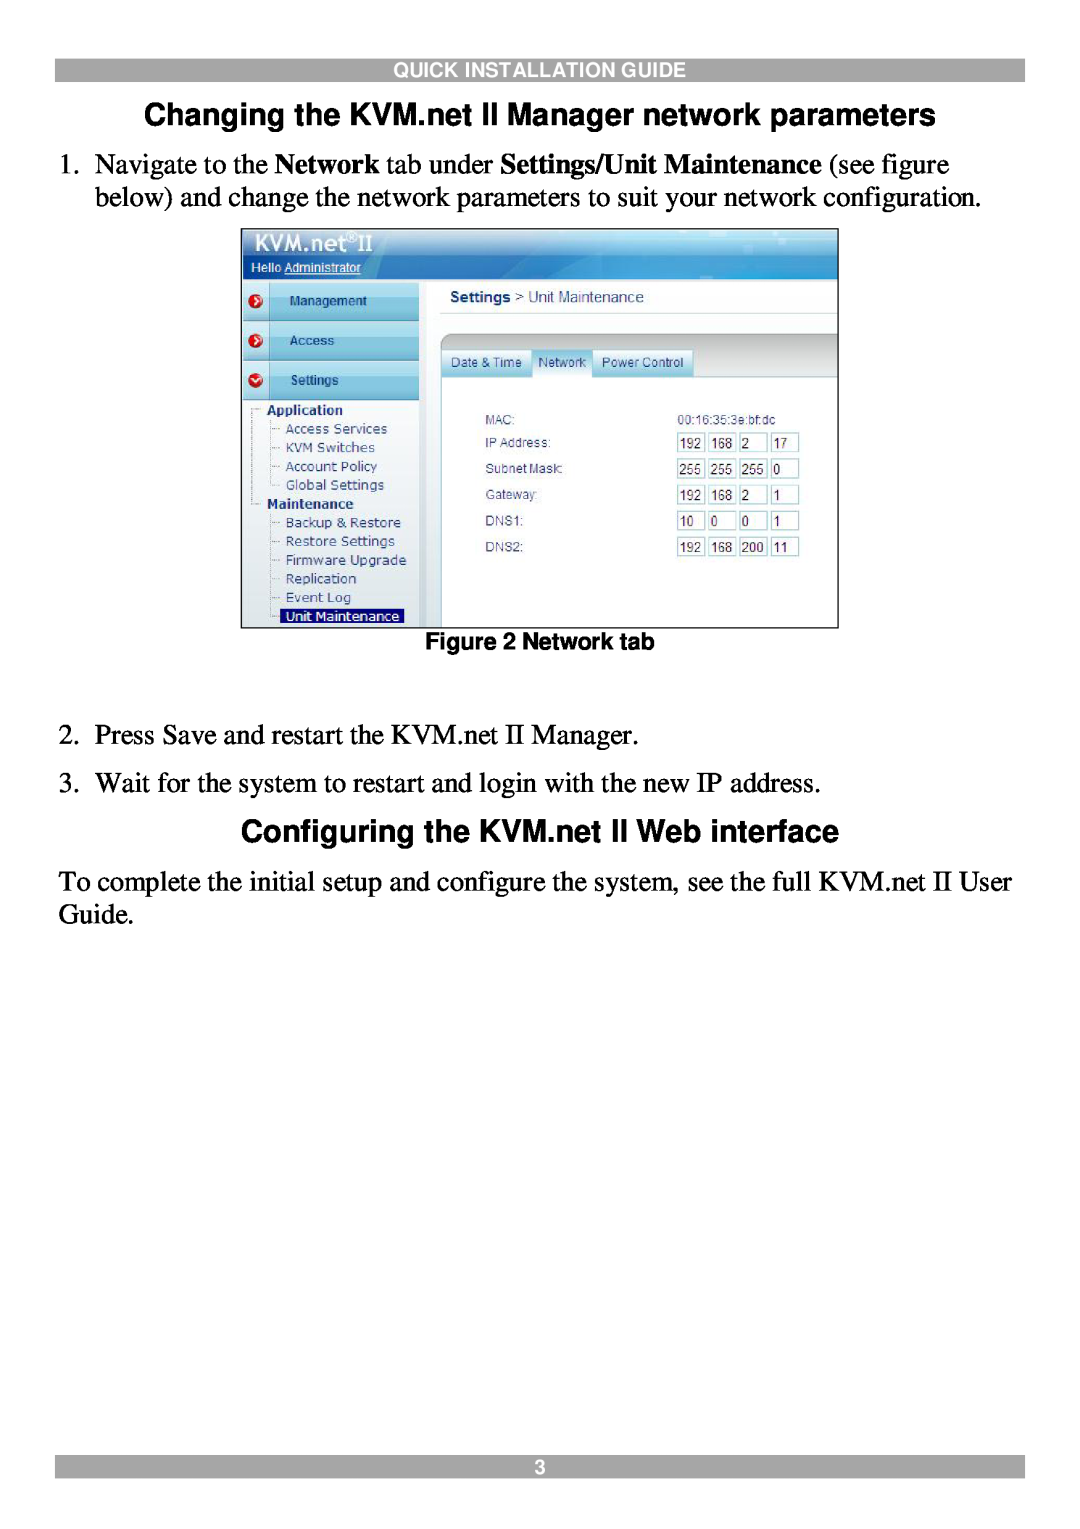 Minicom Advanced Systems Changing the KVM.net II Manager network parameters, Configuring the KVM.net II Web interface 